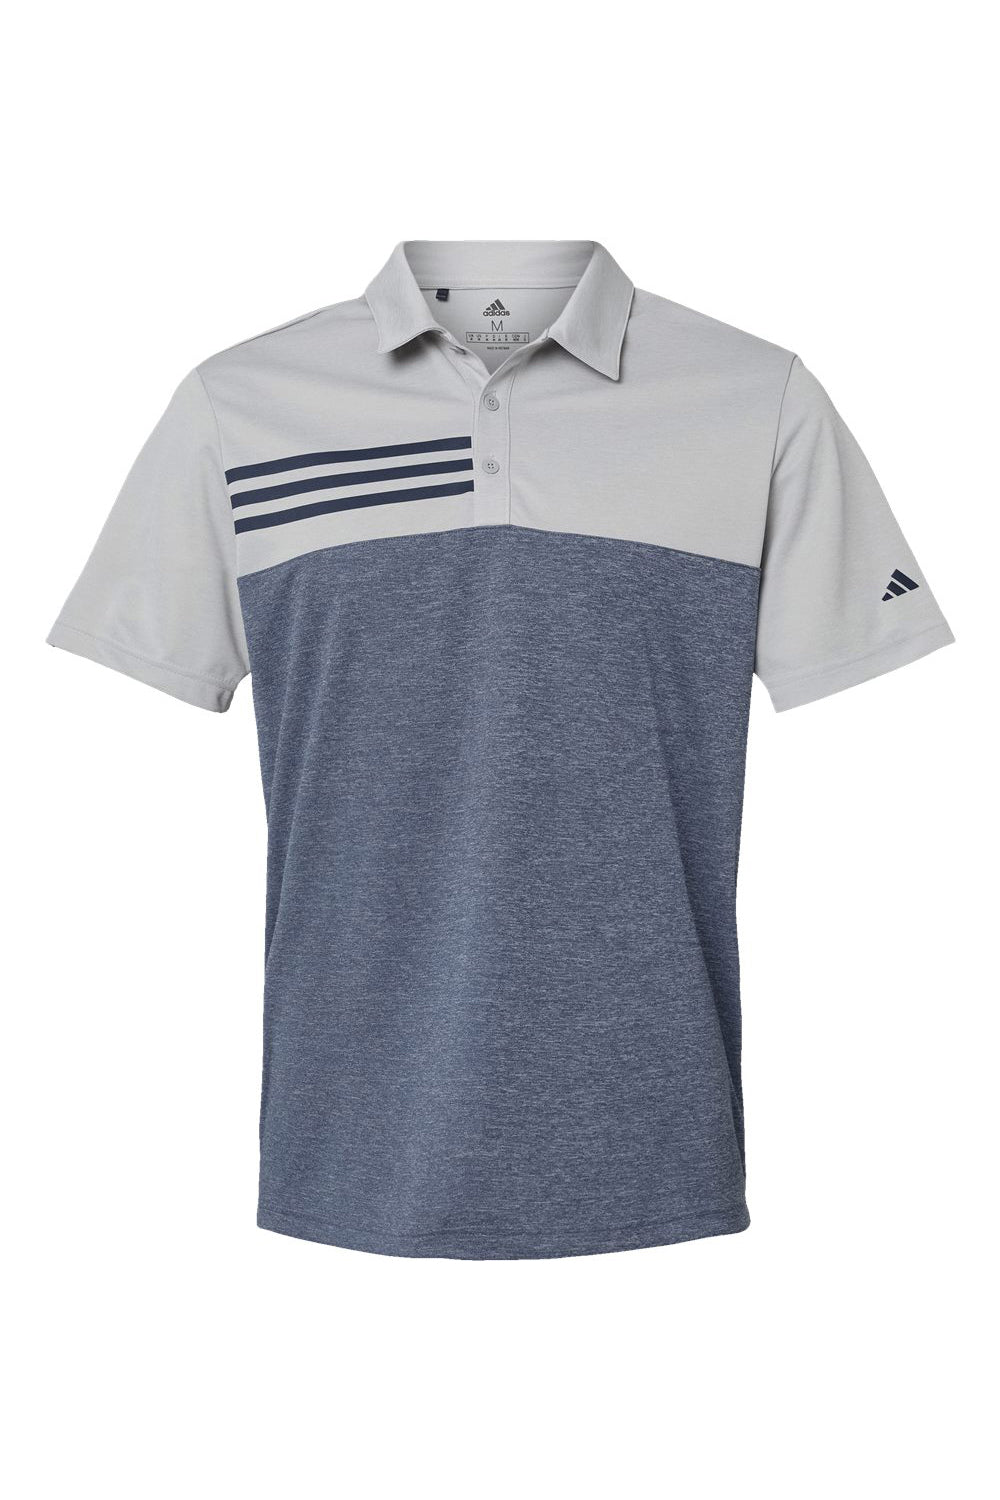 Adidas A508 Mens 3 Stripes Heathered Colorblocked Short Sleeve Polo Shirt Heather Grey/Heather Collegiate Navy Blue Flat Front